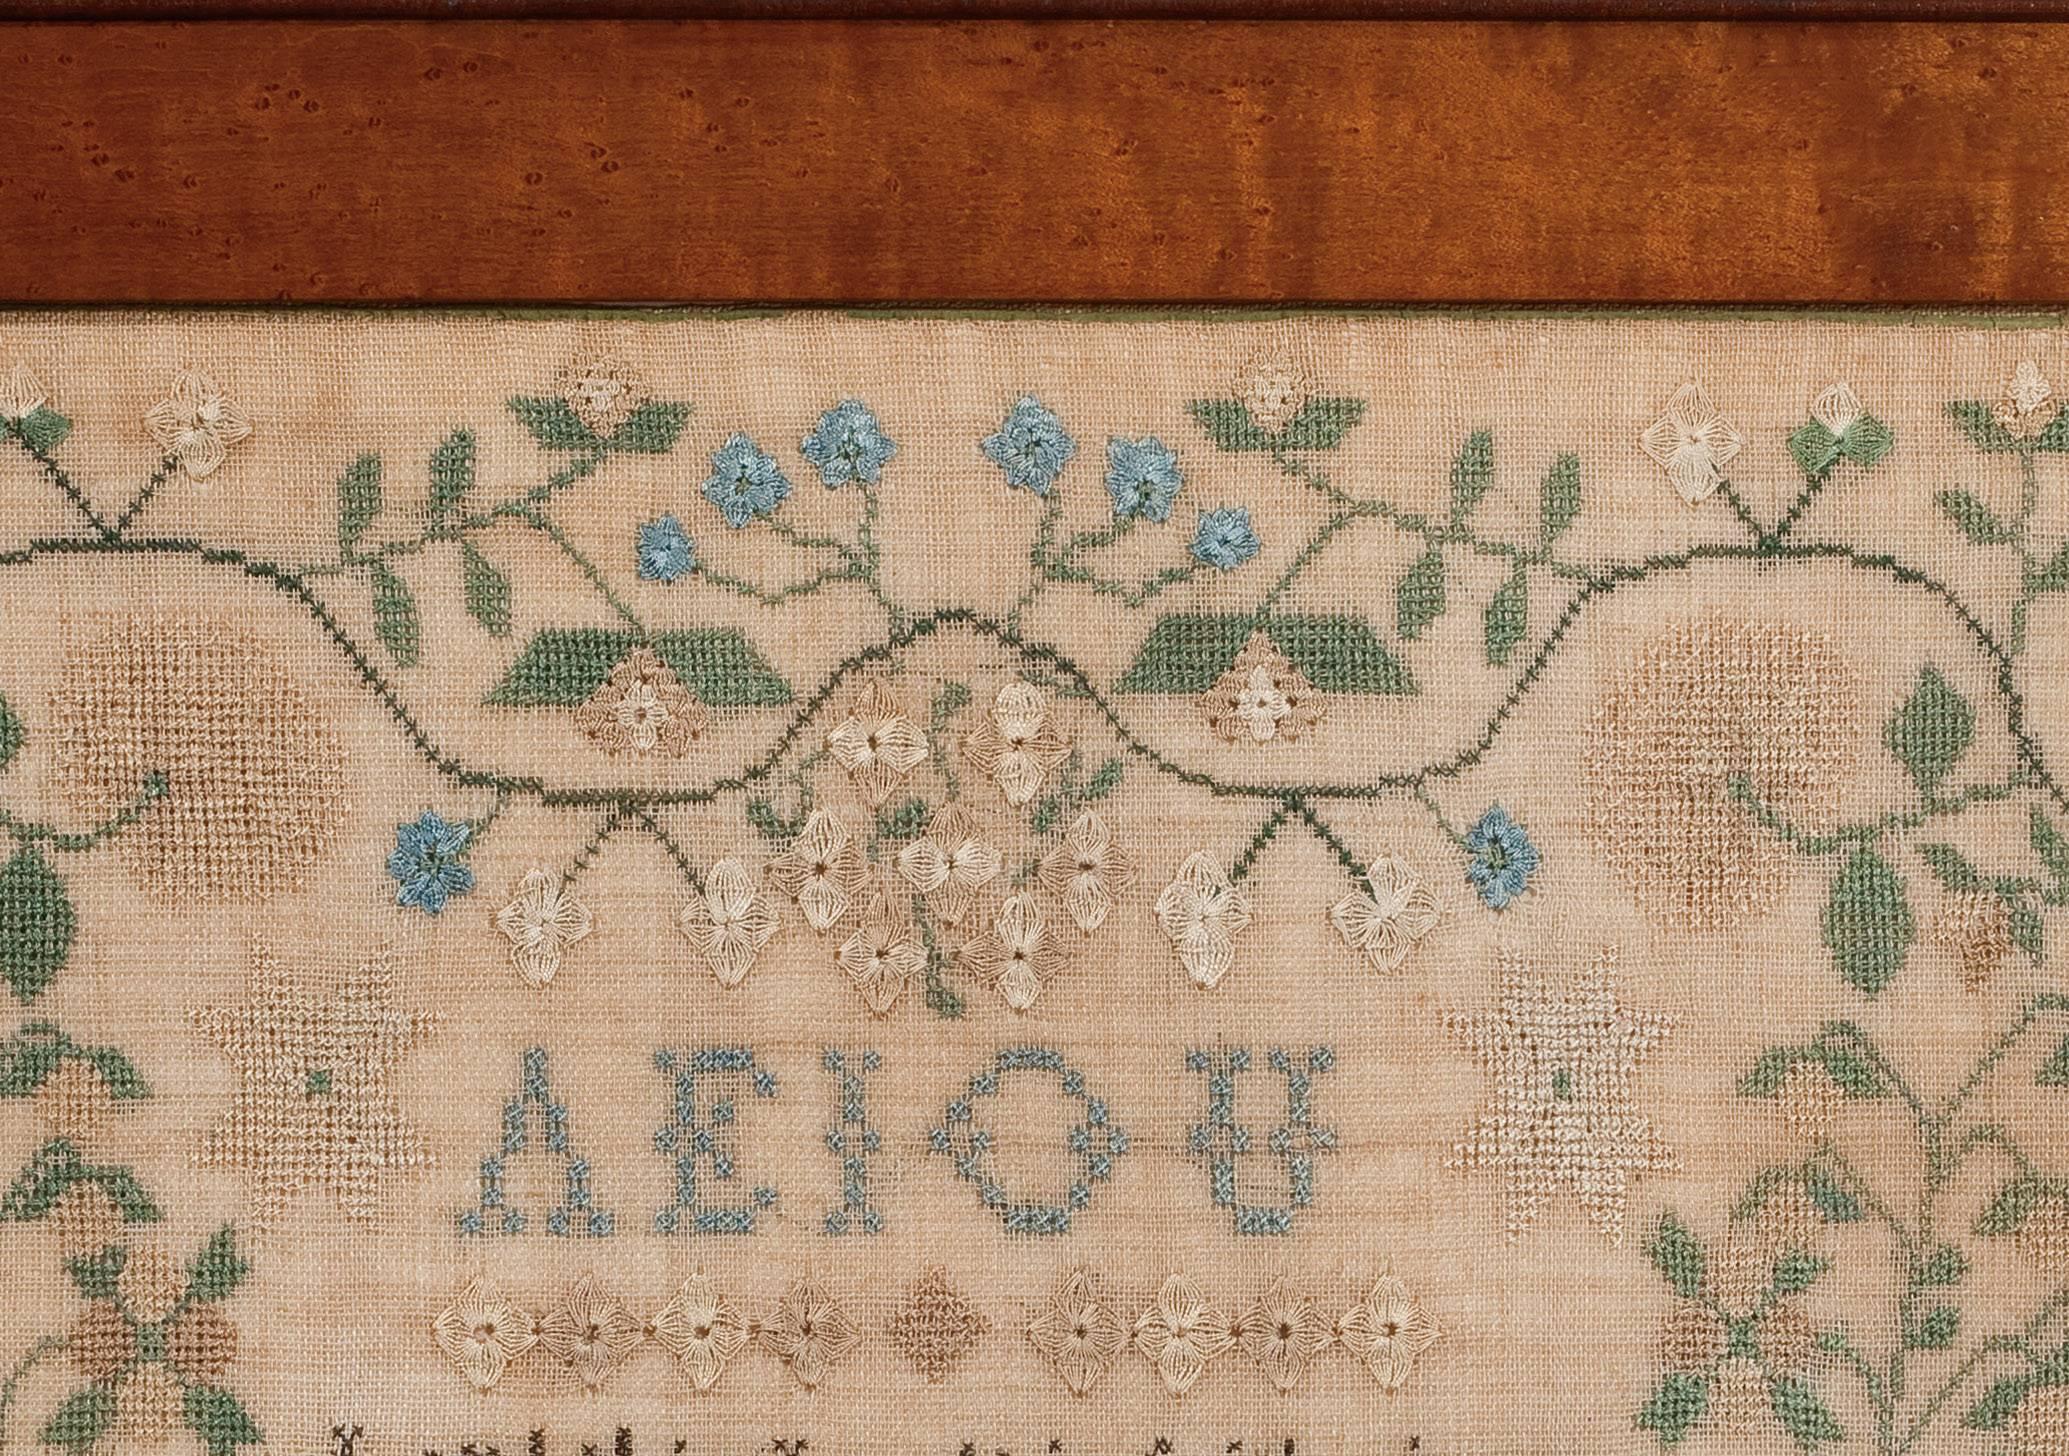 Schoolgirls from Pennsylvania continued to produce strong, pictorial samplers into the 1840s, occasionally featuring large, public buildings. Catharine Earnest’s sampler, with a wonderful church building and an outstanding border, is a praiseworthy